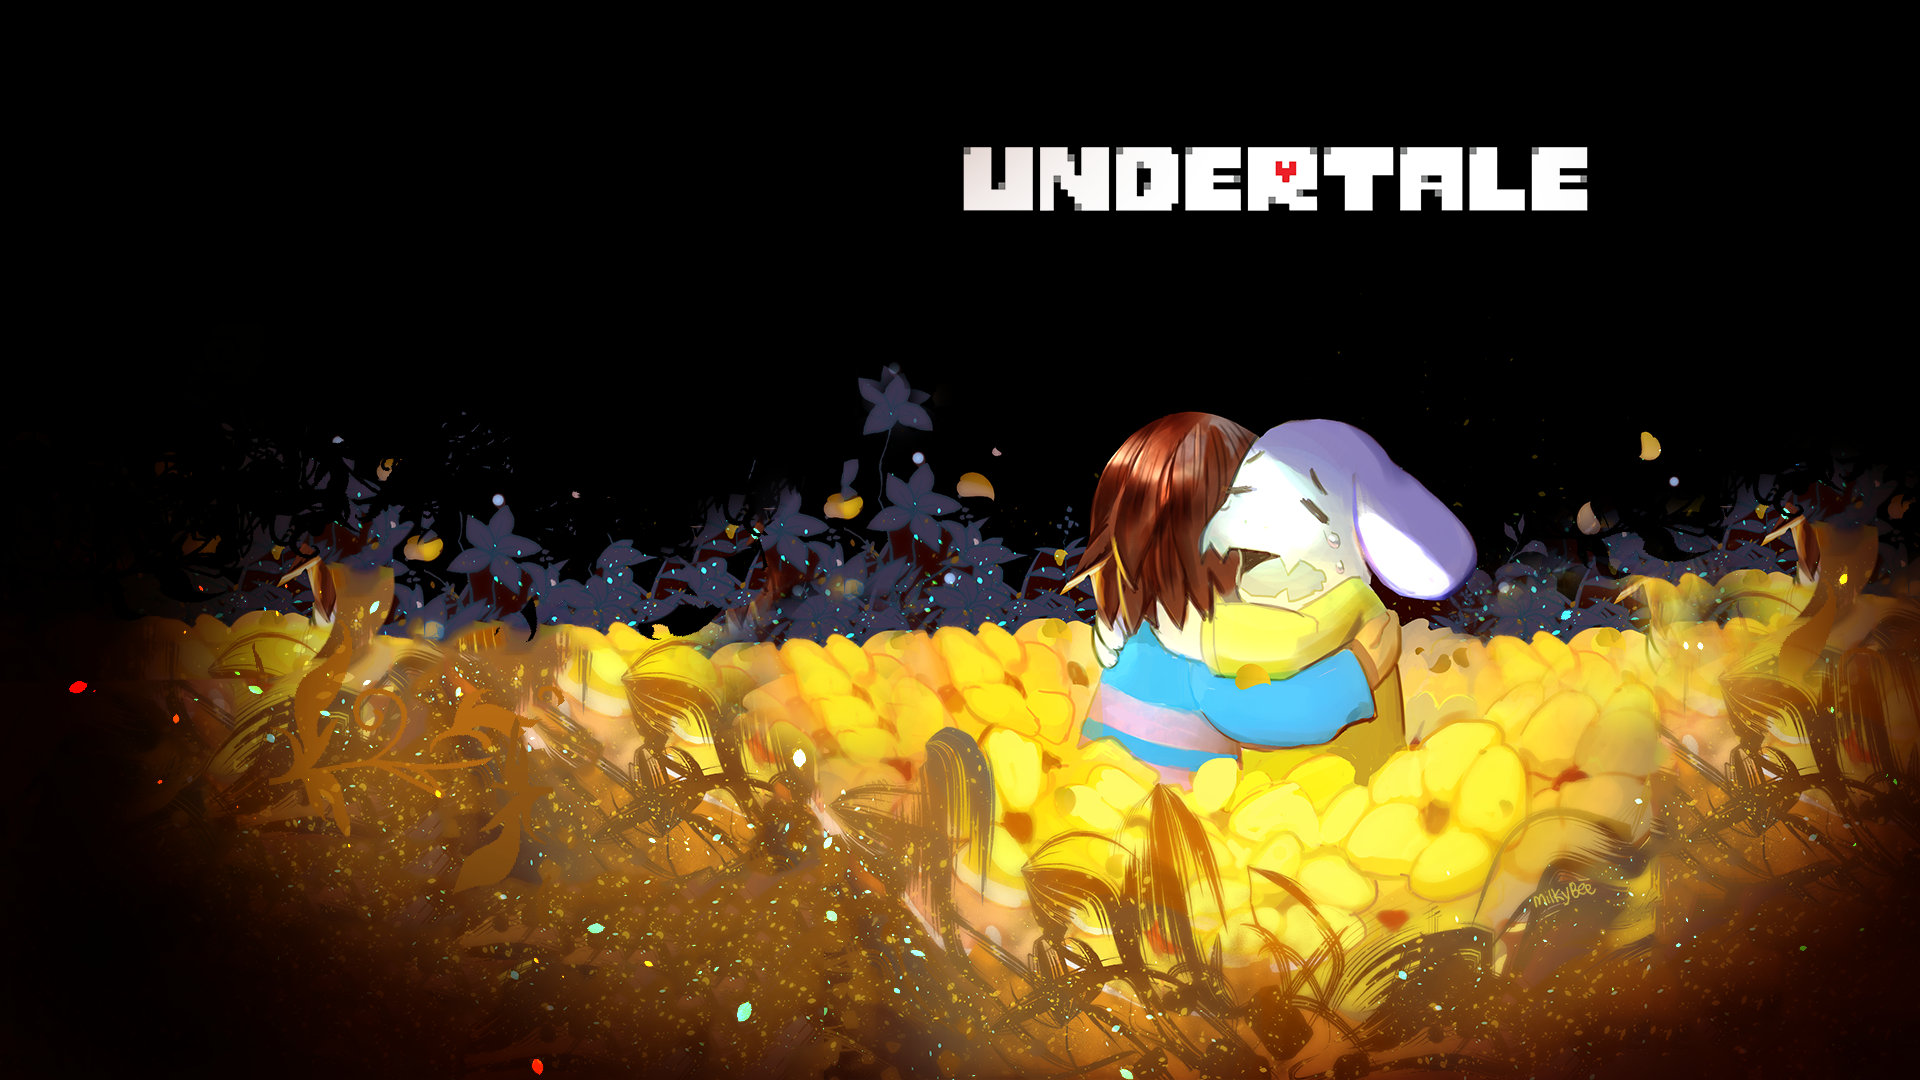 undertale download free pc full version